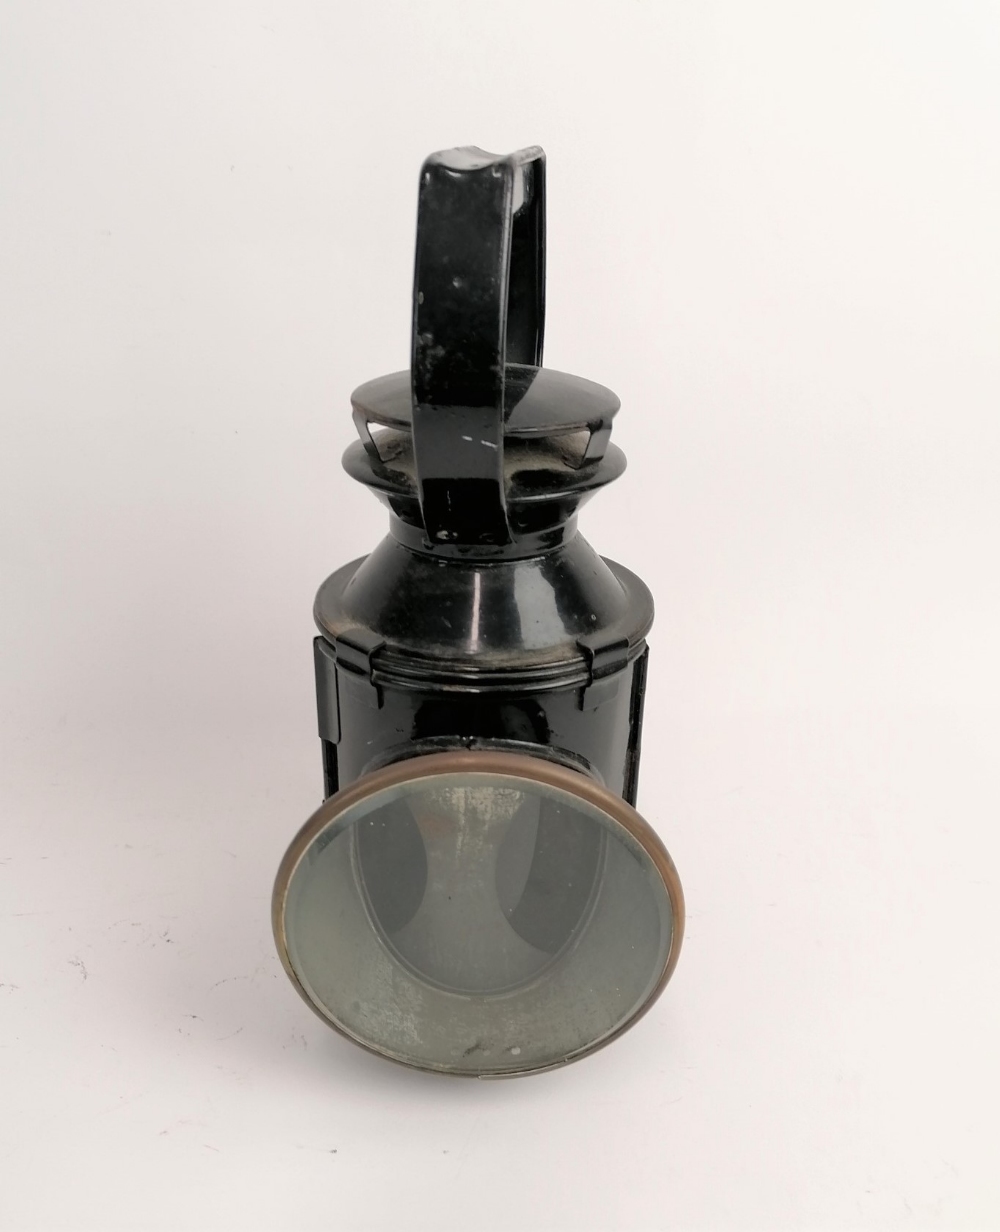 A British Railways three aspect hand lamp, with embossed BR initials to the side,